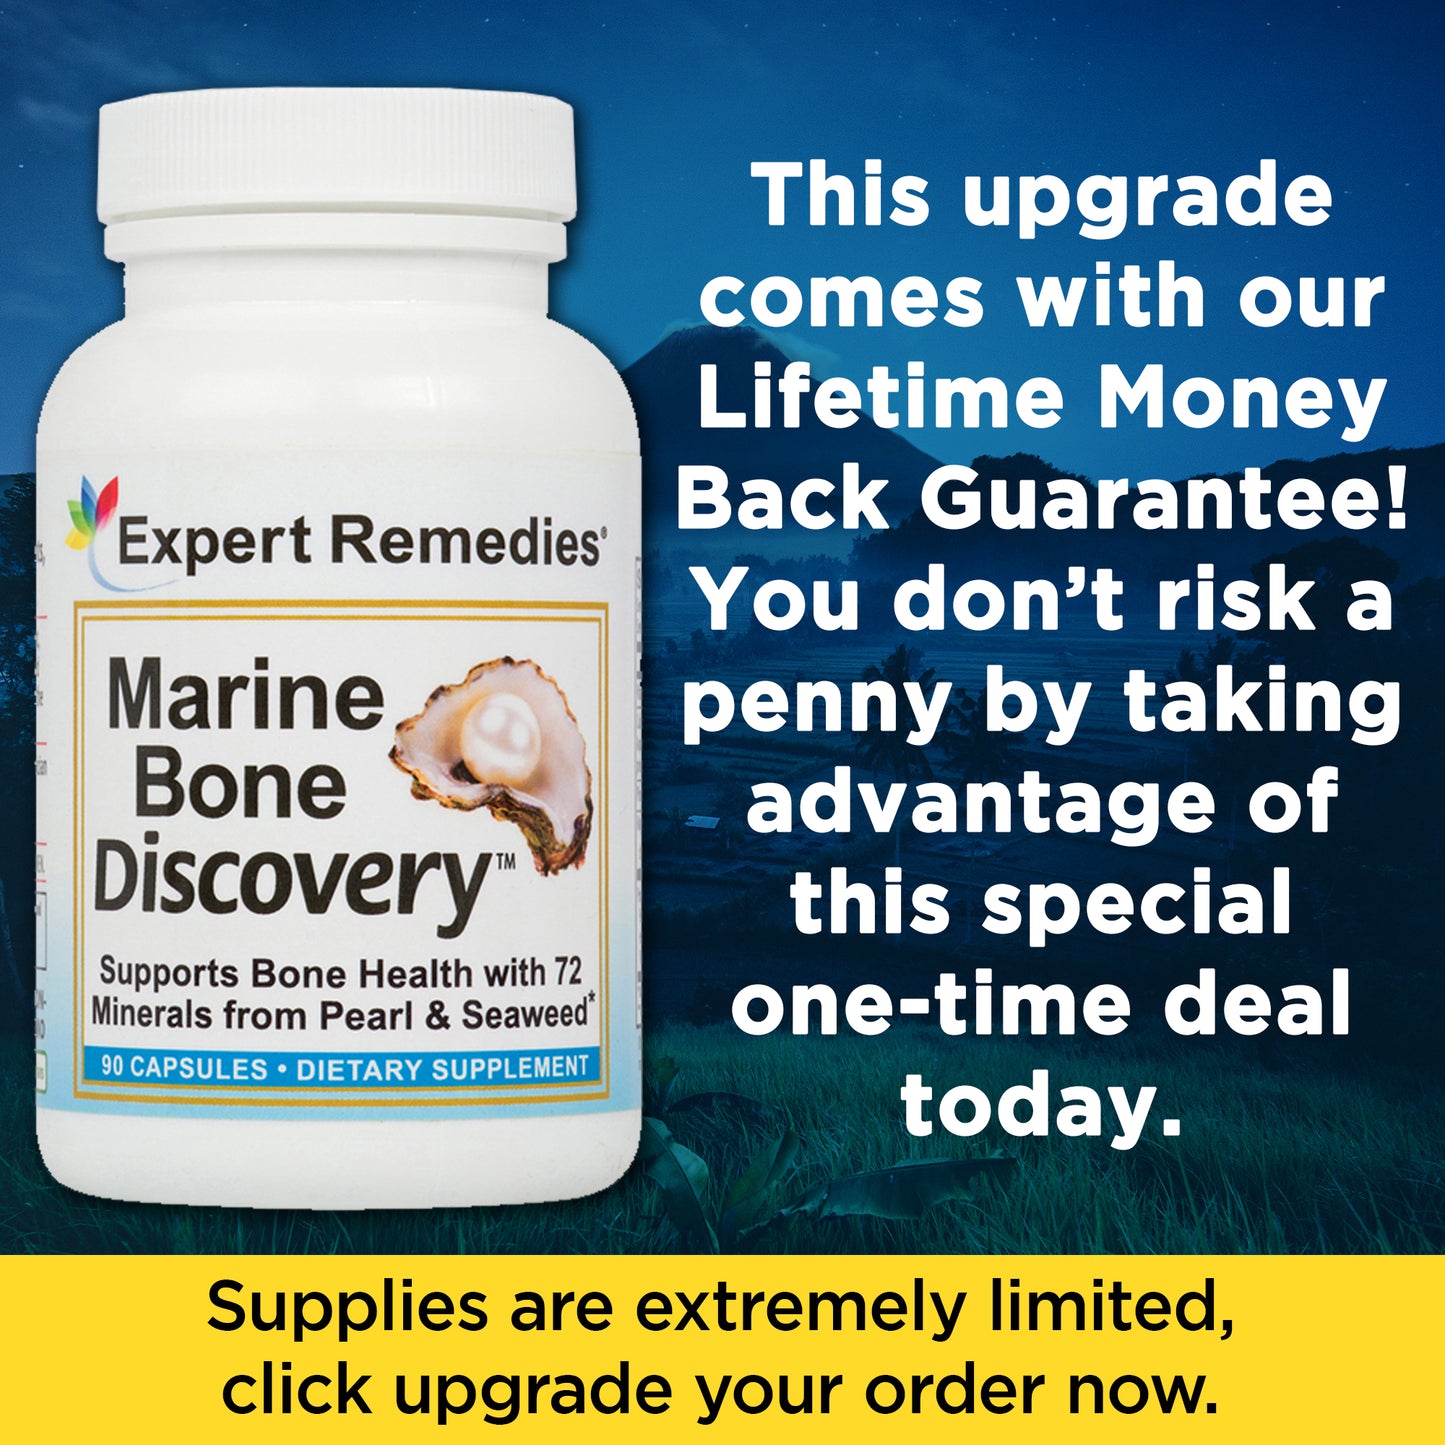 Marine Bone Discovery Buy 2 Get 1 Free for 33.29 per bottle